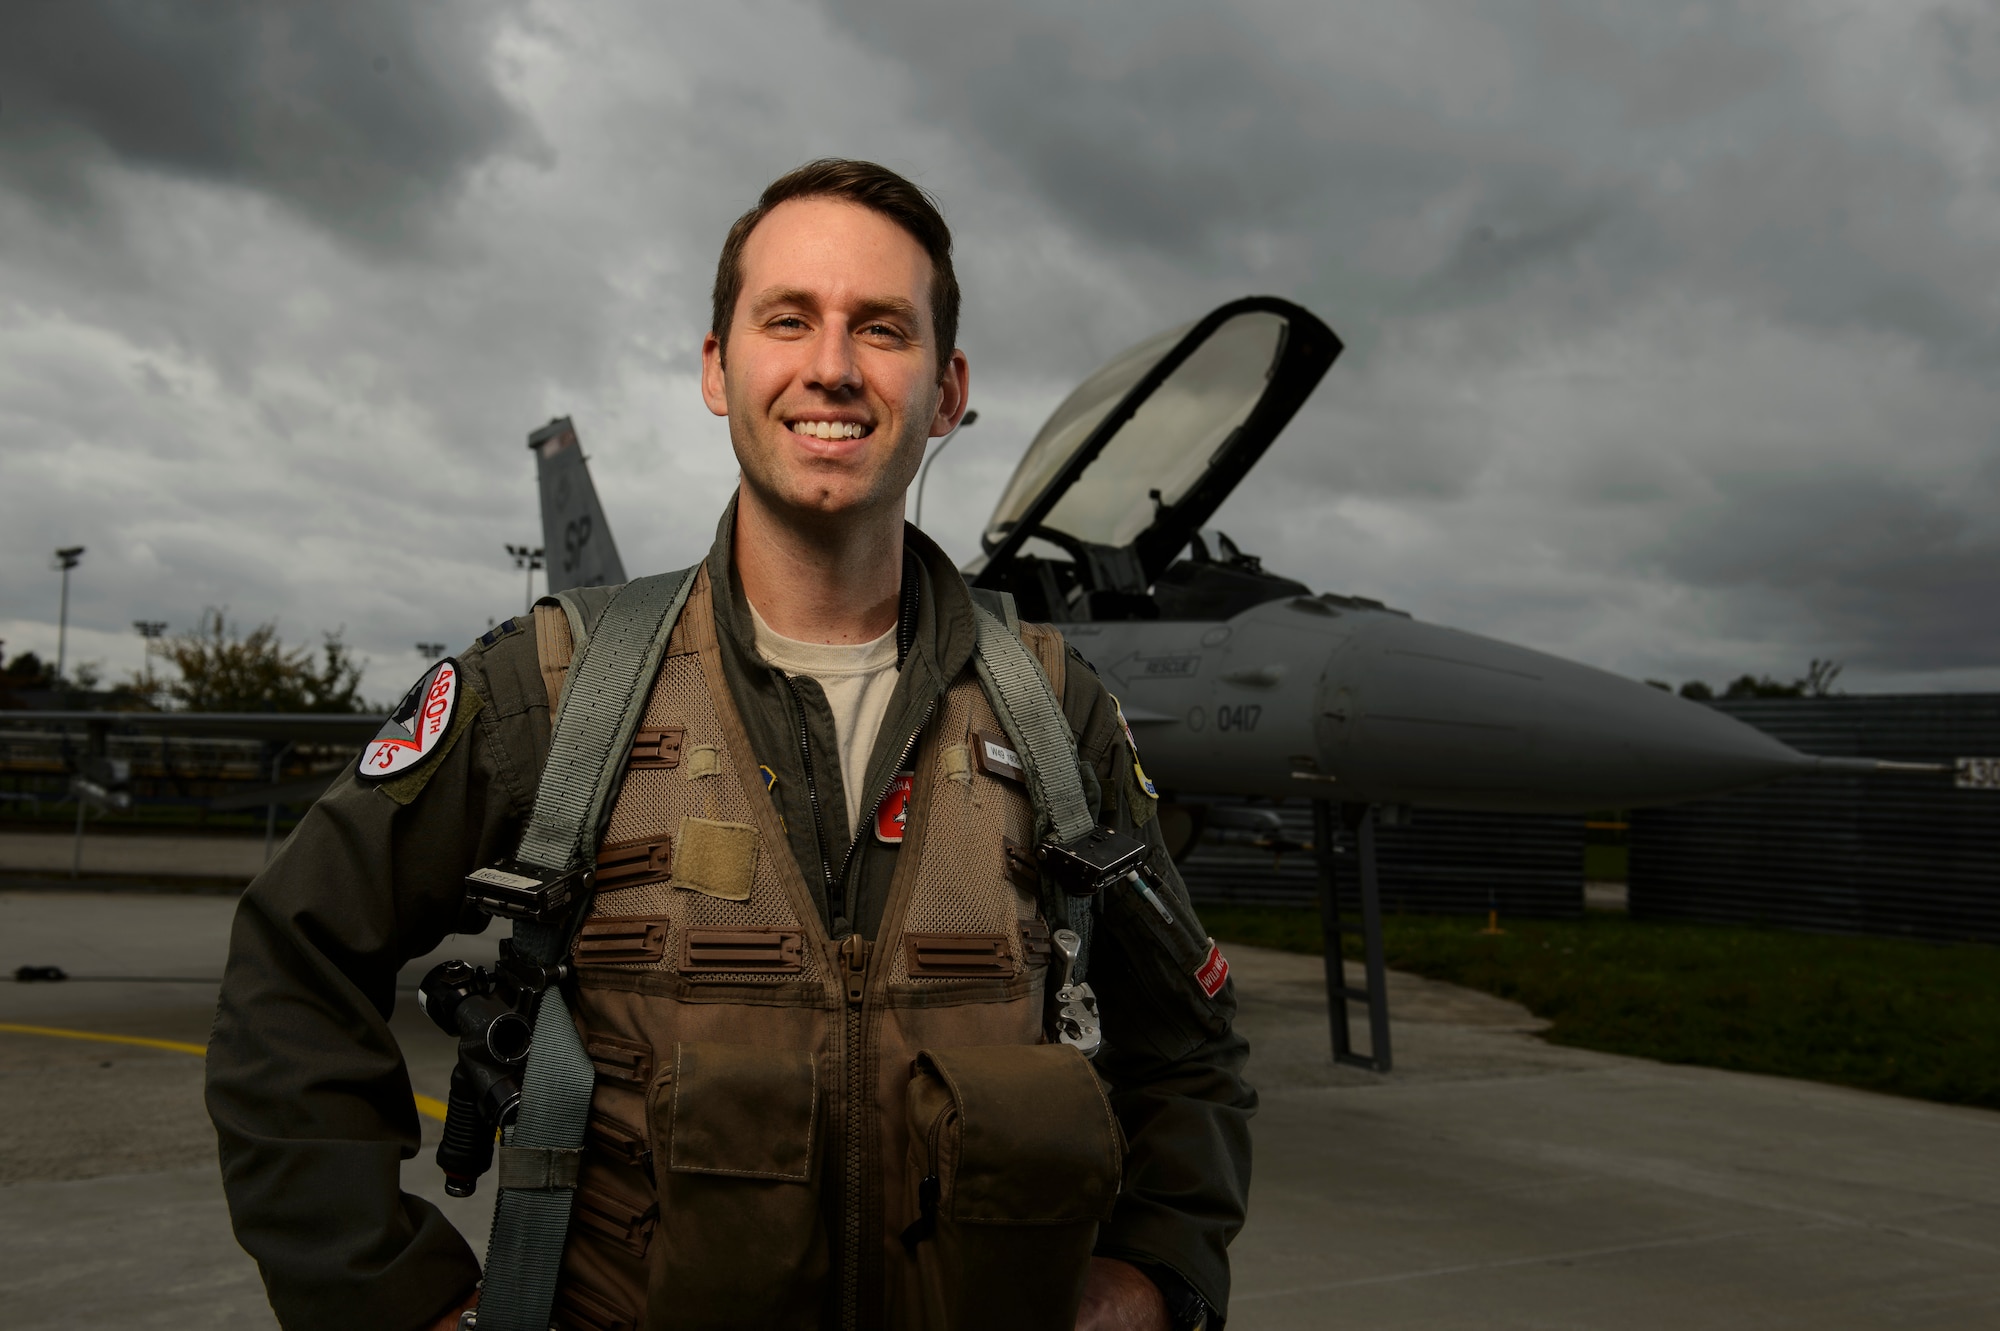 Capt. Tyler Brummer, 480th Fighter Squadron F-16 Pilot, stands next to an F-16 Fighting Falcon, Oct. 3rd, 2017. Capt. Brummer is the 2017 USAFE Fighter Aviator of the Year.